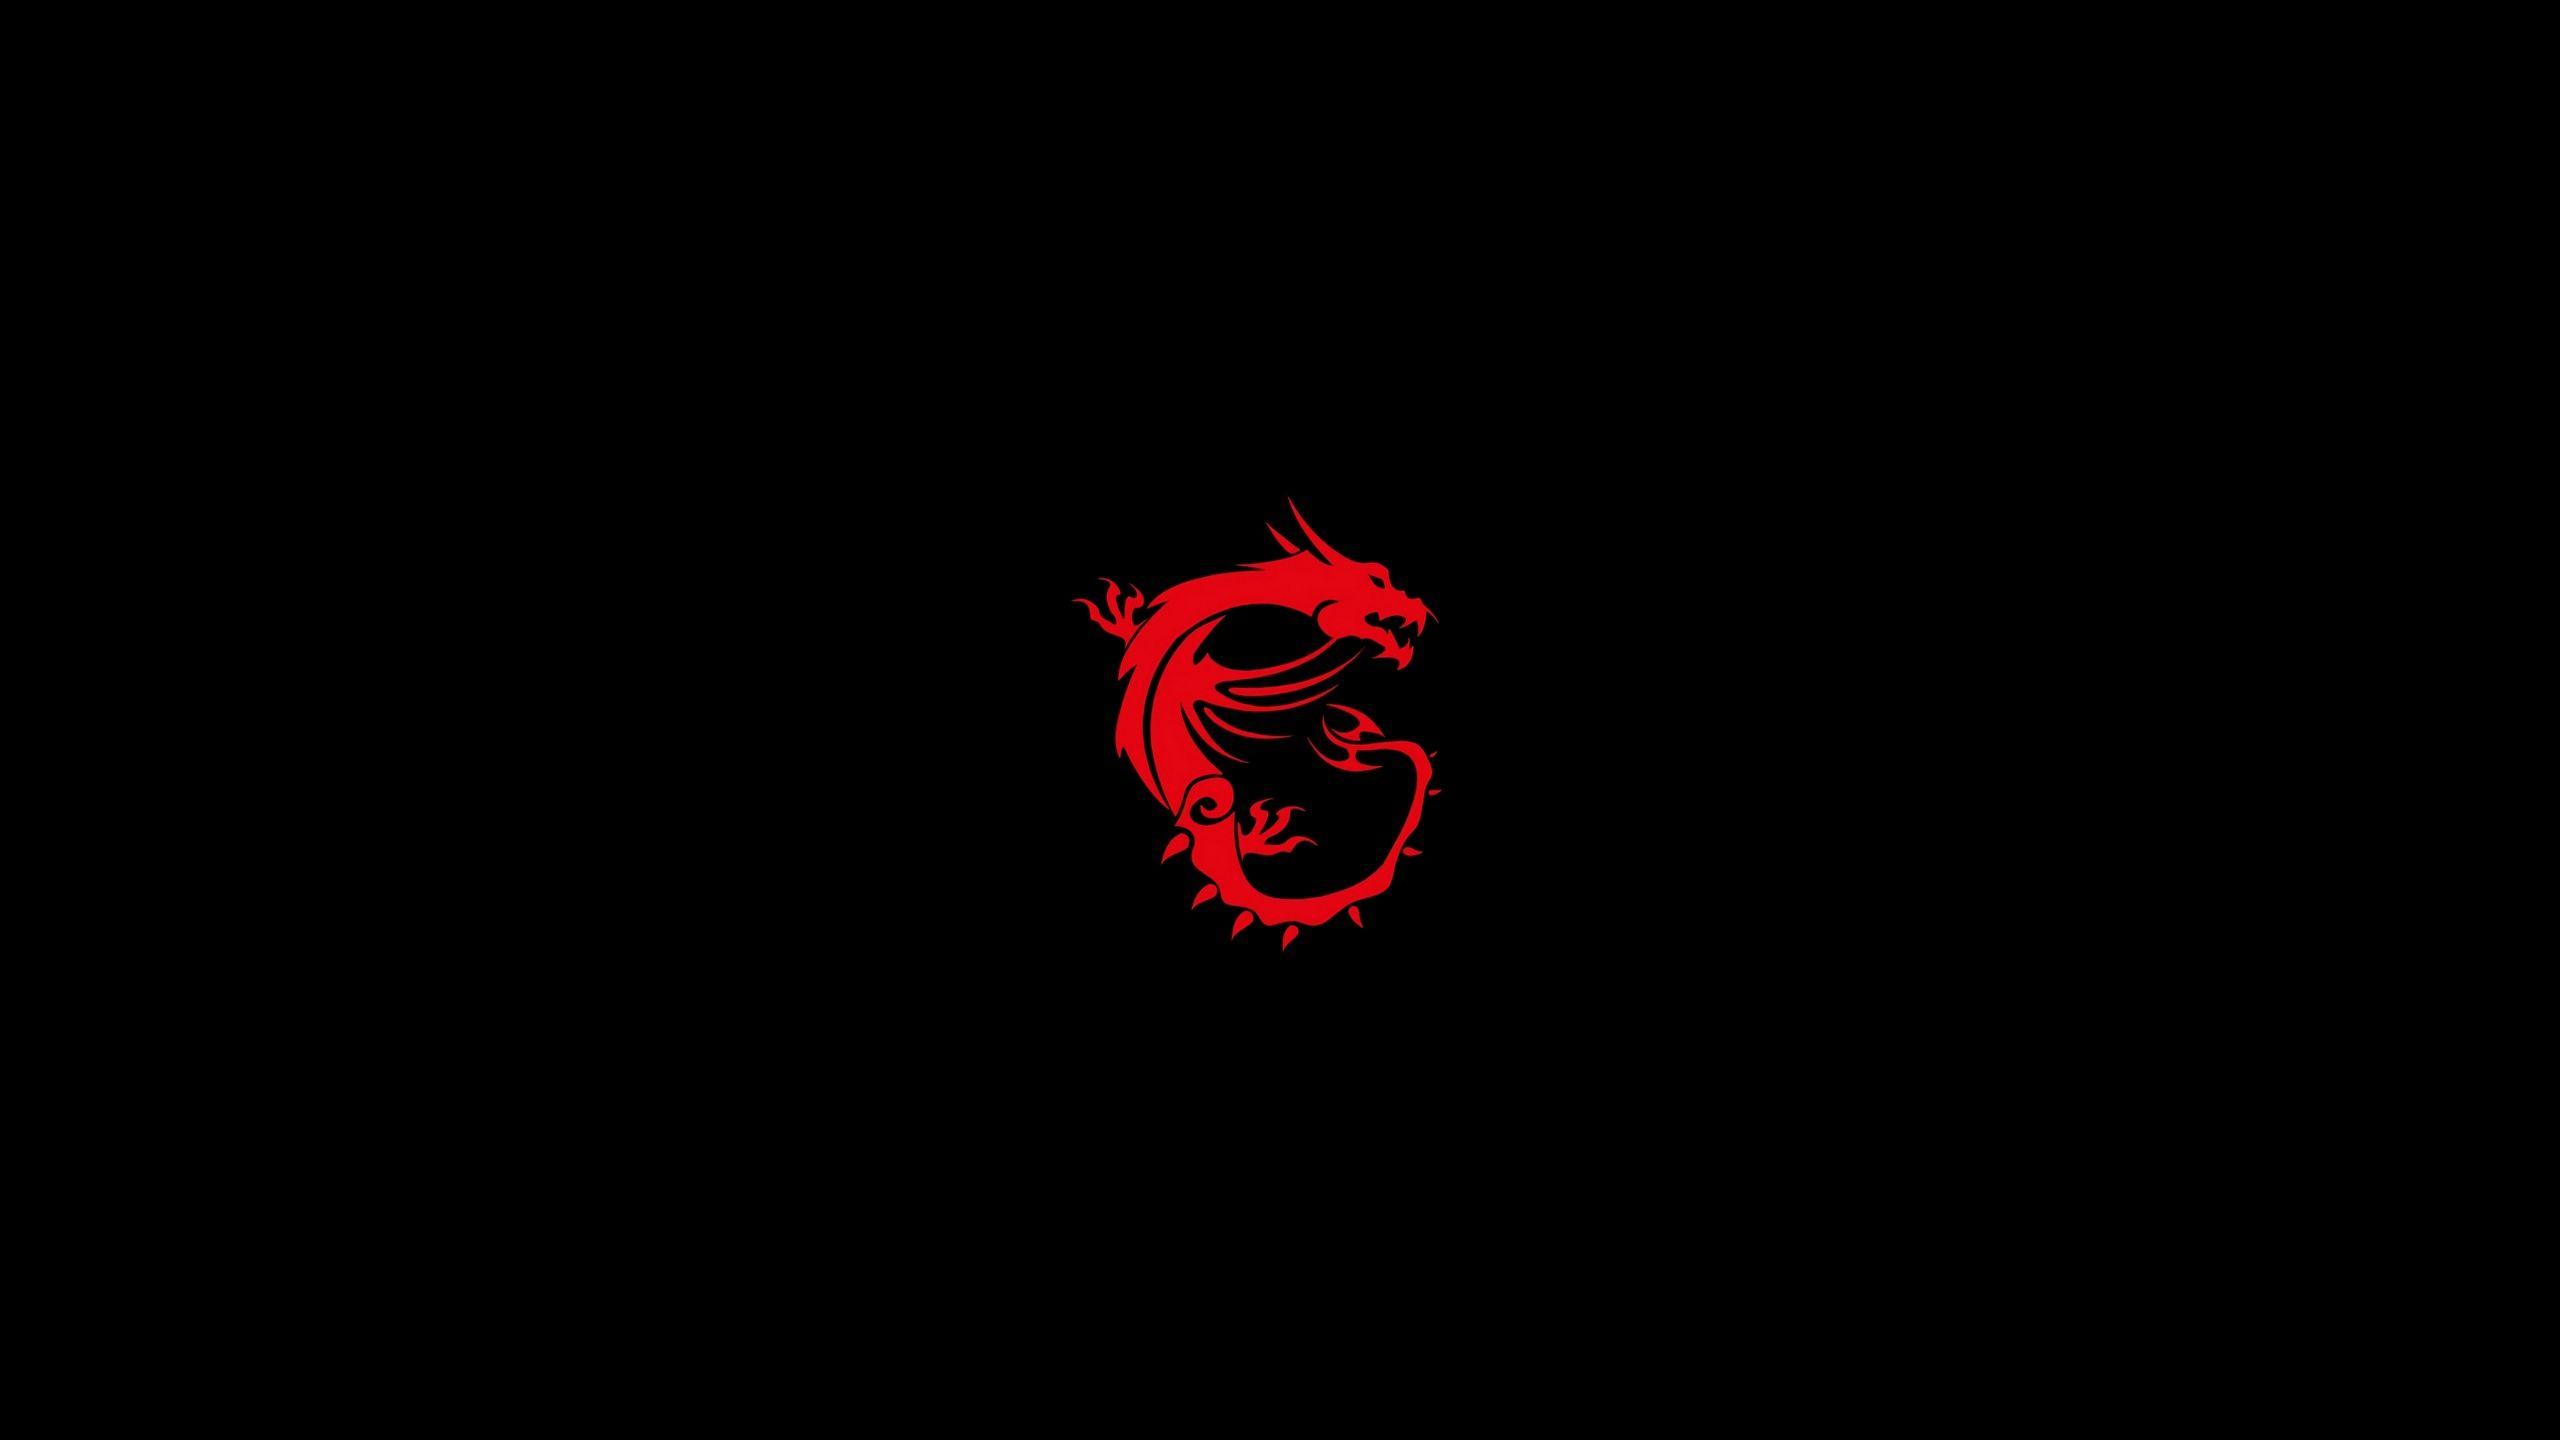 Black and Red Dragon Logo - Msi Dragon Logo, HD Computer, 4k Wallpapers, Images, Backgrounds ...